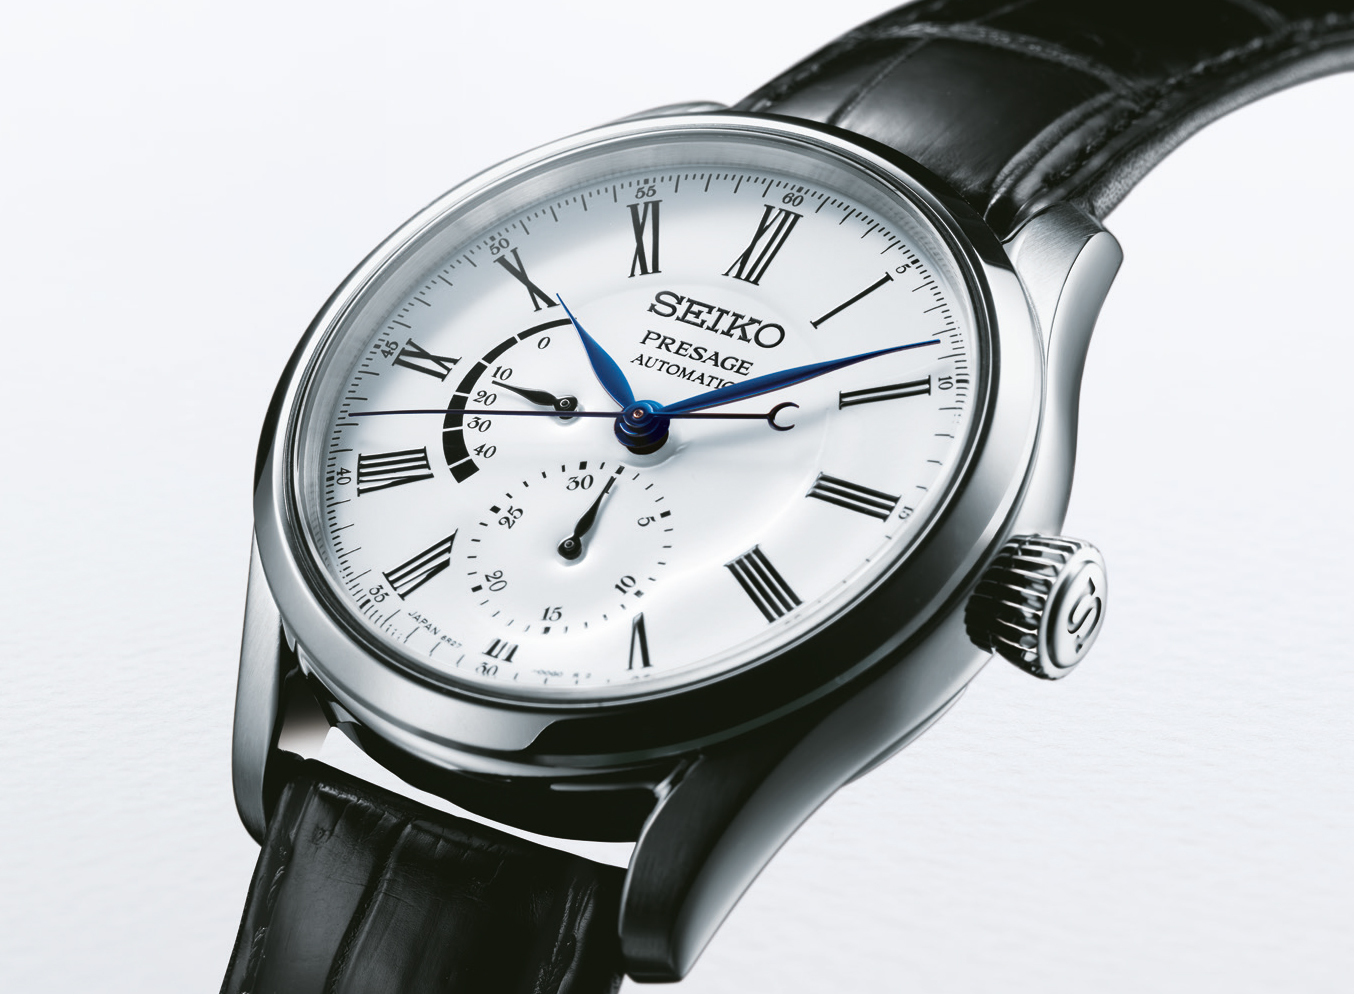 European Sales Boost Financial Results For Seiko UK Limited